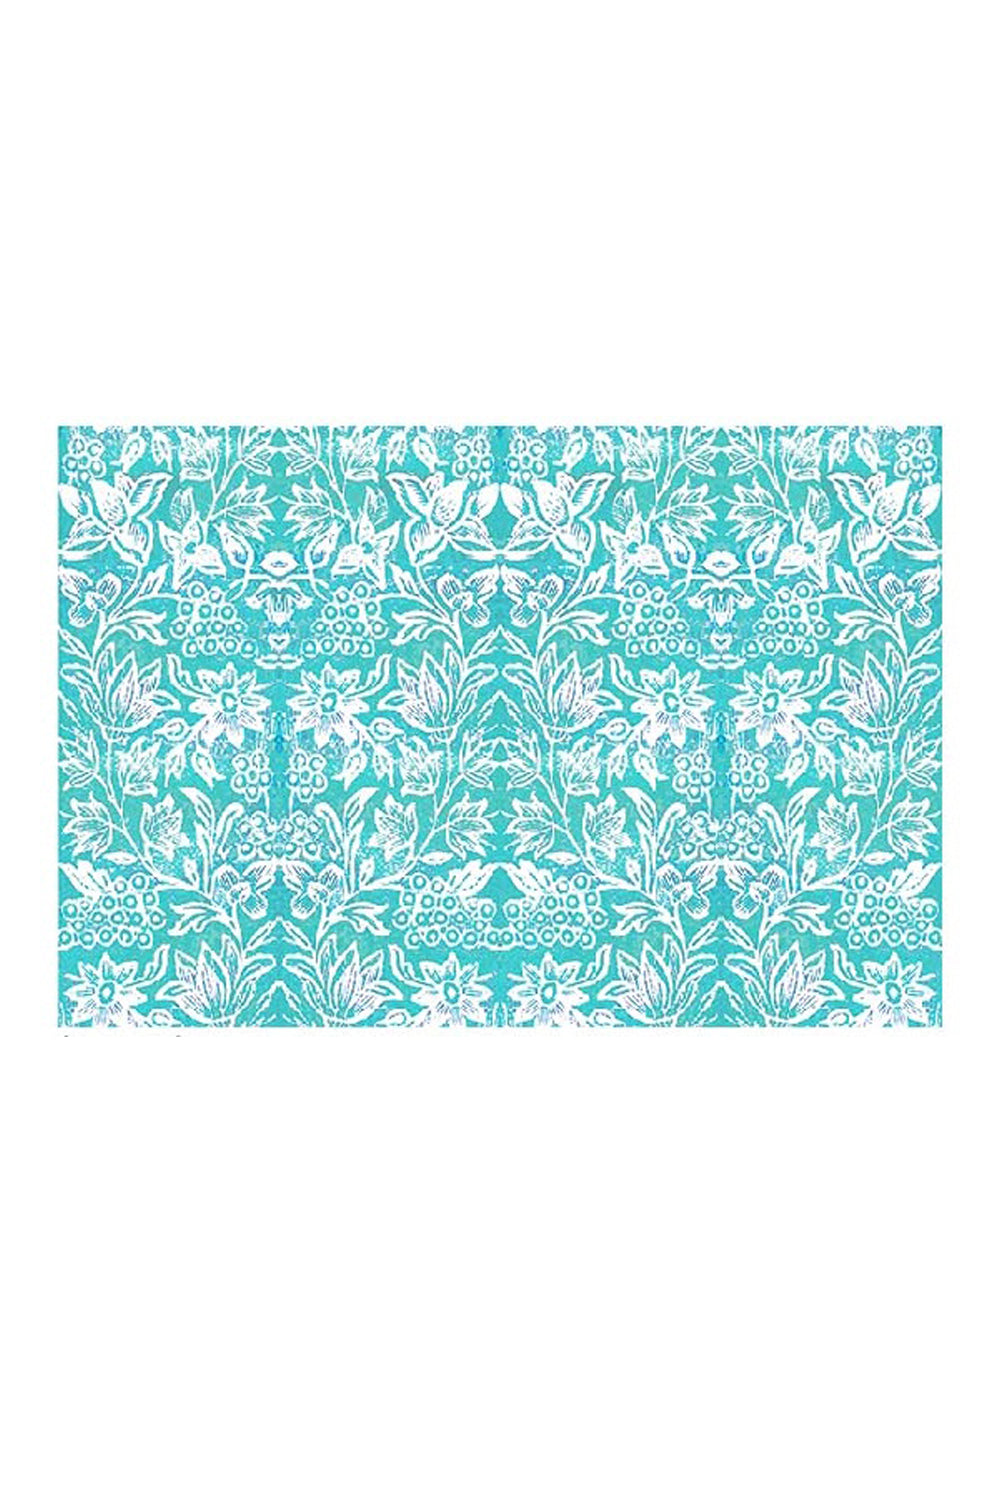 ANNA CHANDLER CANVAS PLACEMAT TURQUOISE BIRDS